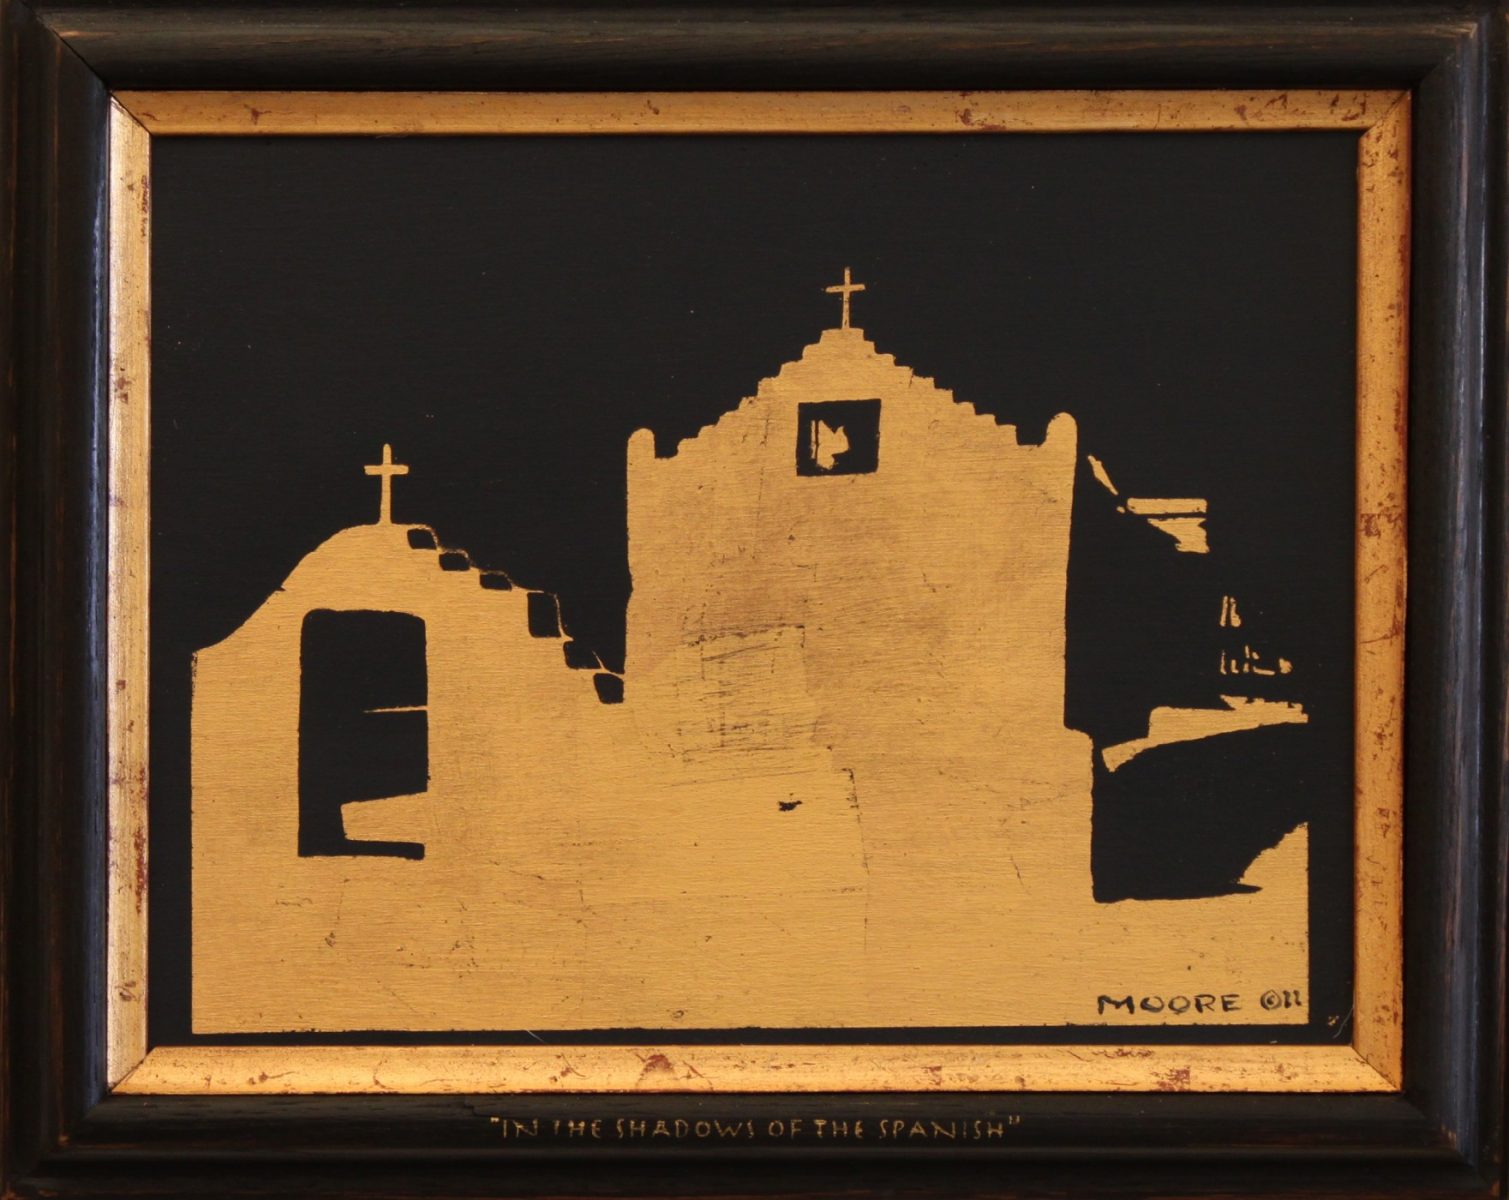 Gold leaf painting of New Mexico Mission by Paul Moore